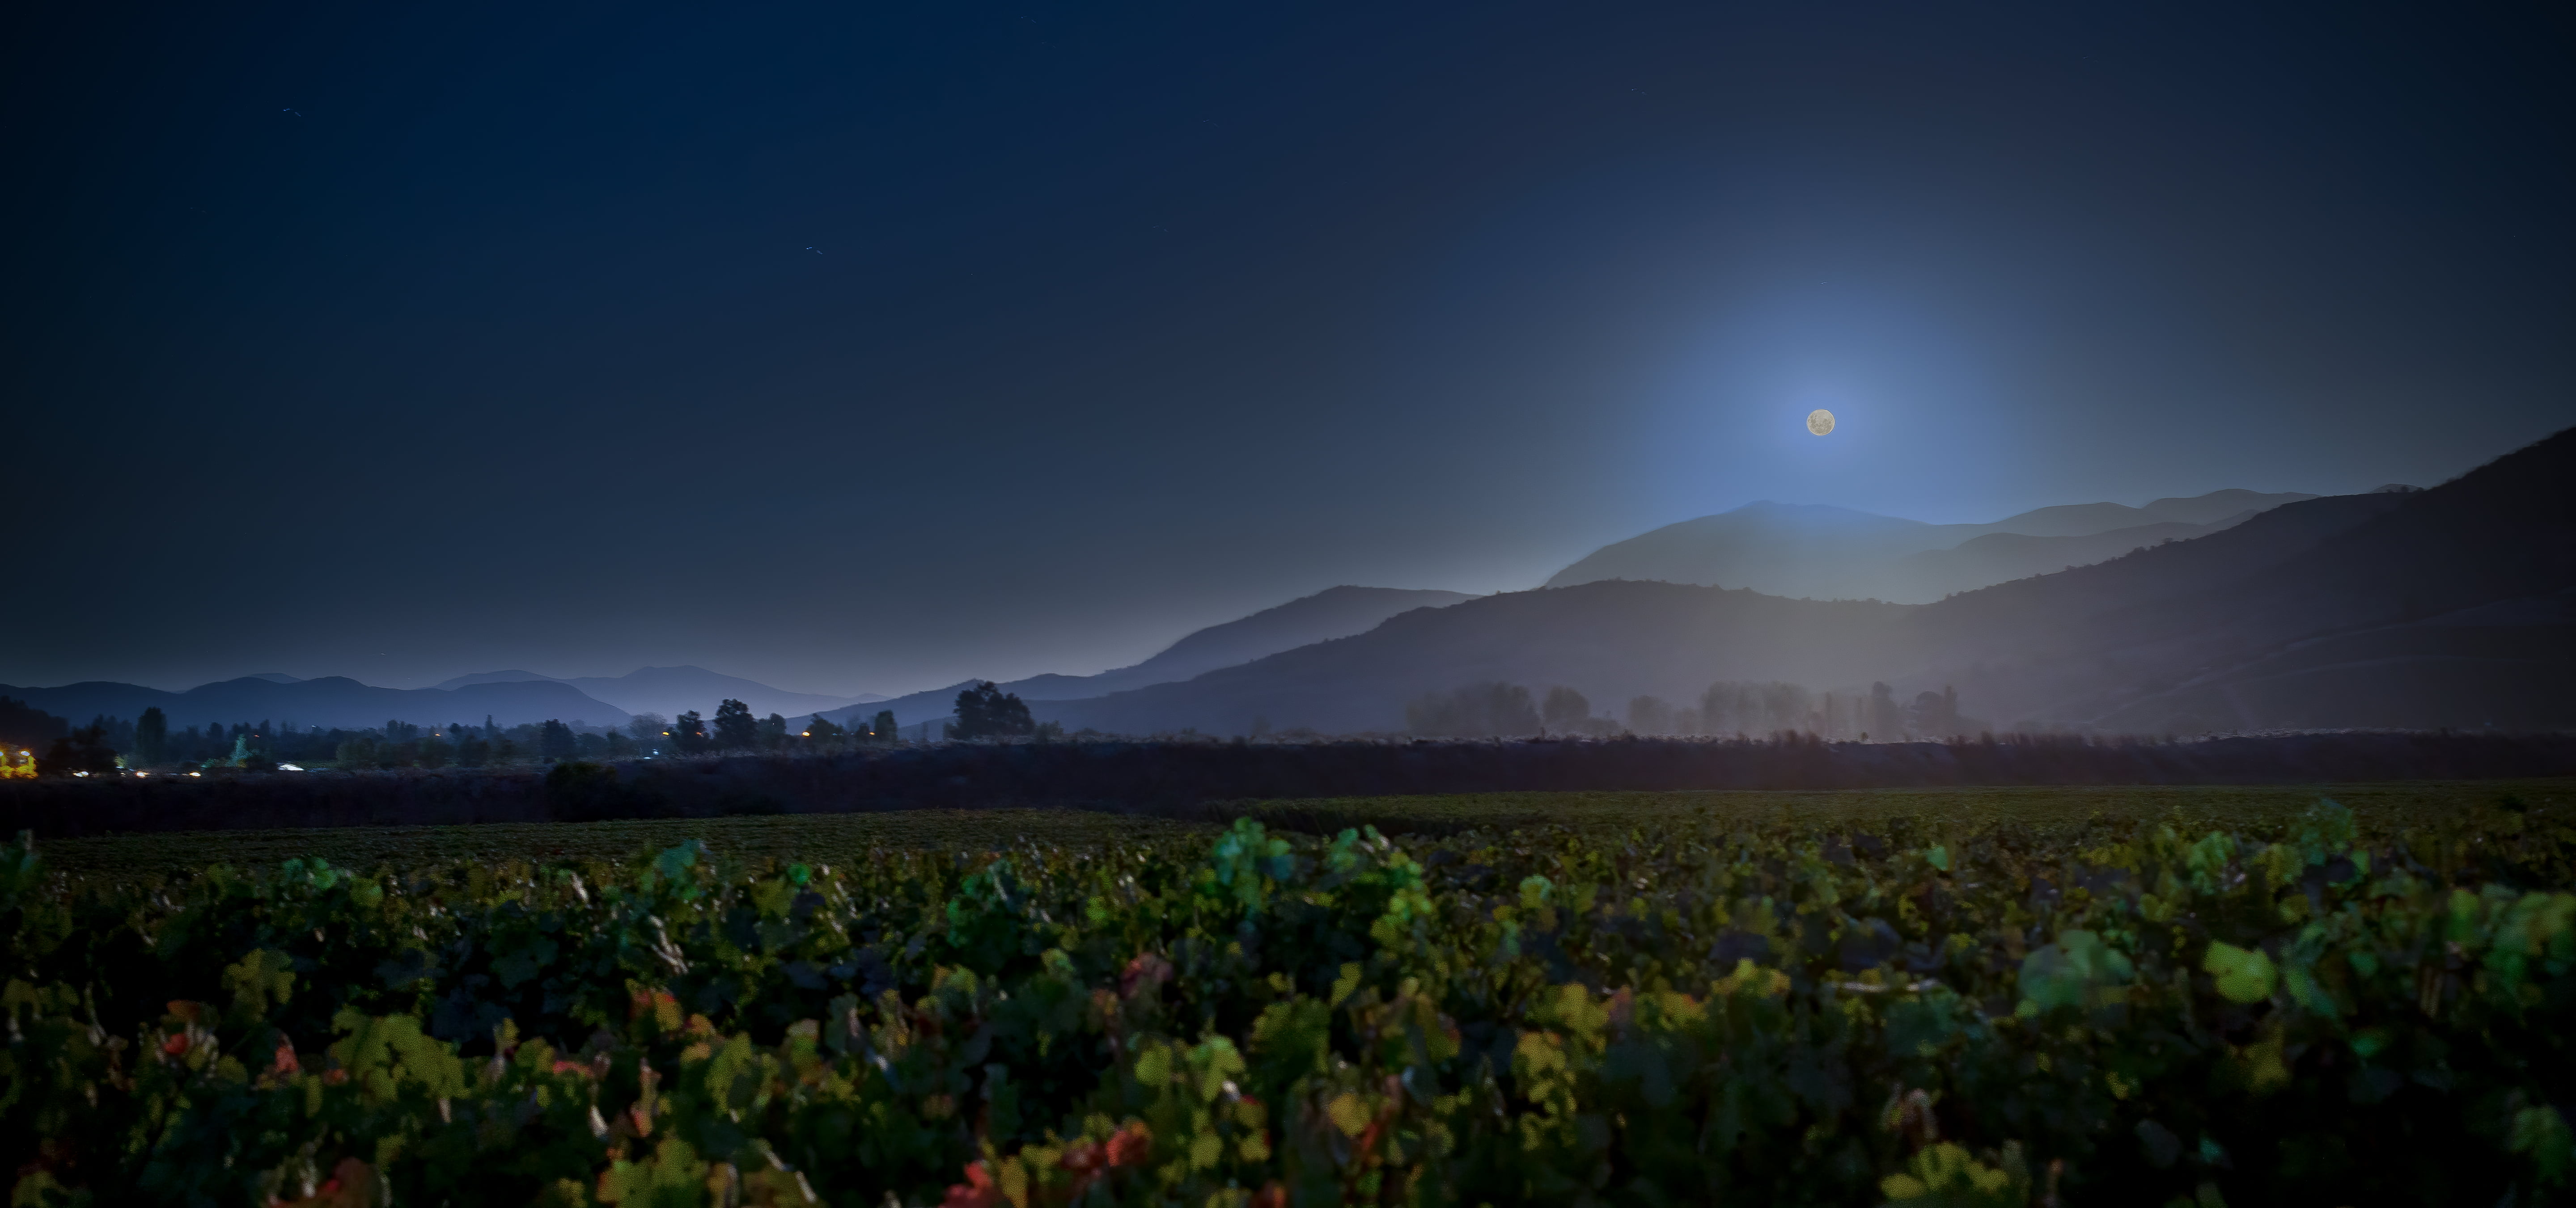 NIGHT HARVEST 2021 AND A FULL MOON TO CELEBRATE THE START OF THE HARVEST